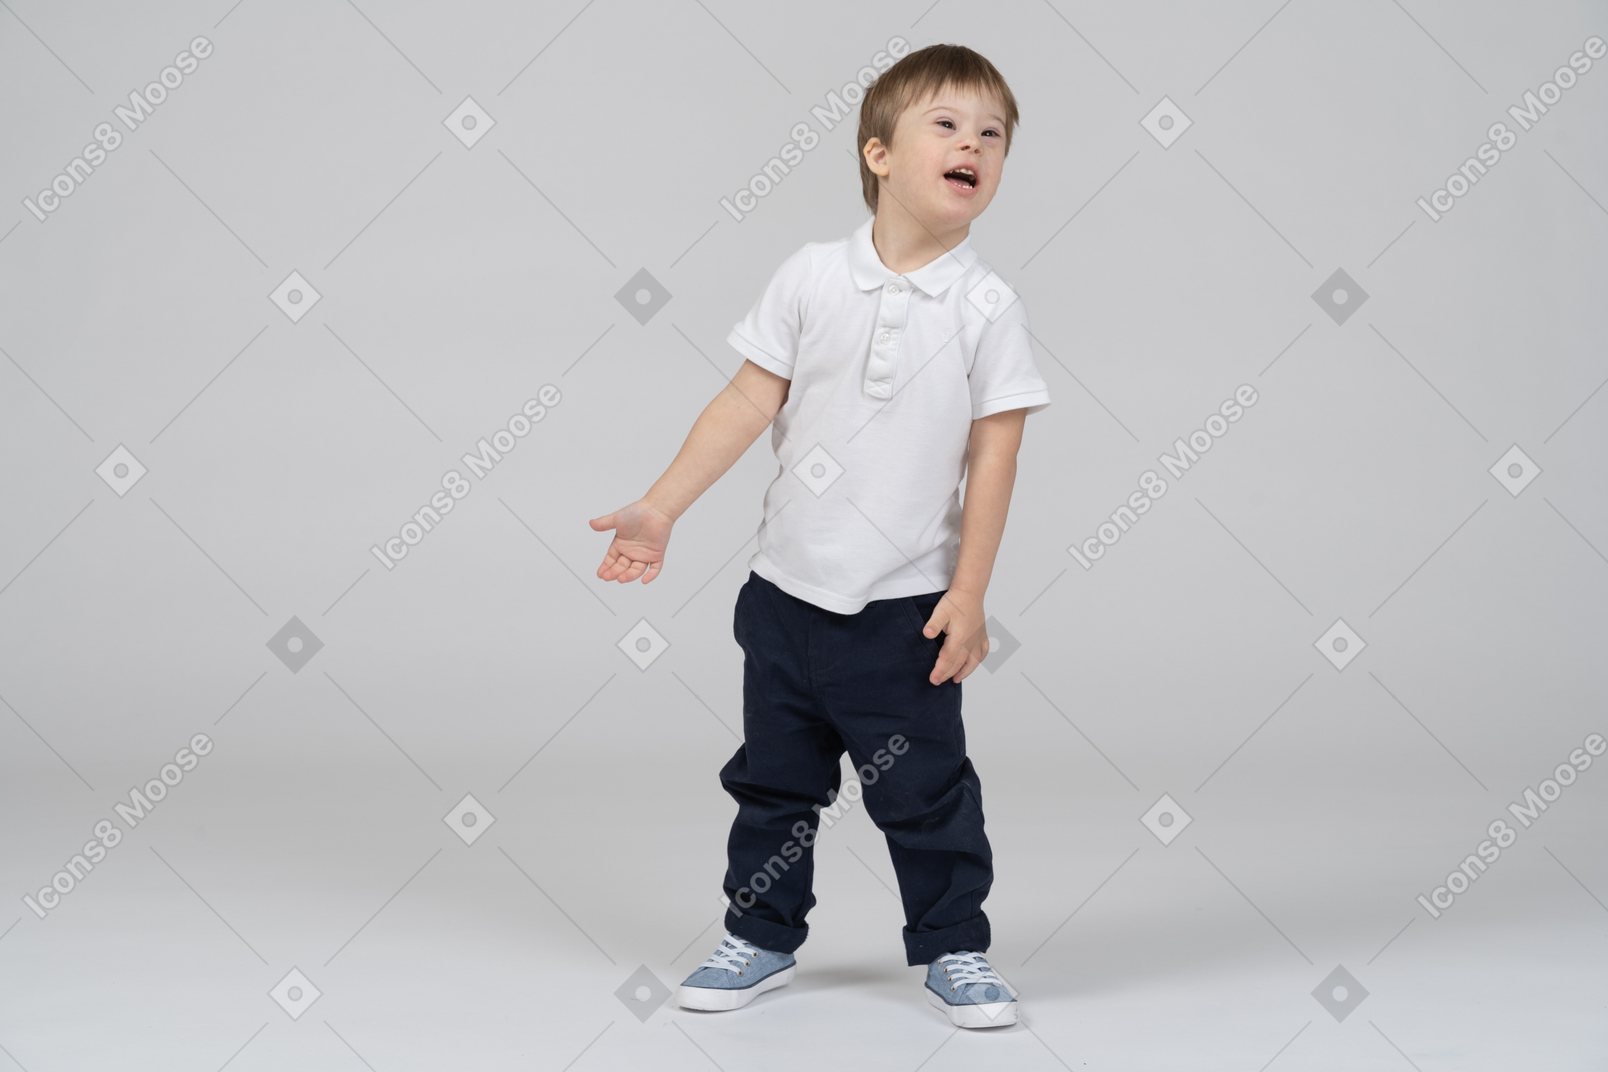 Distracted little boy in casual clothes standing